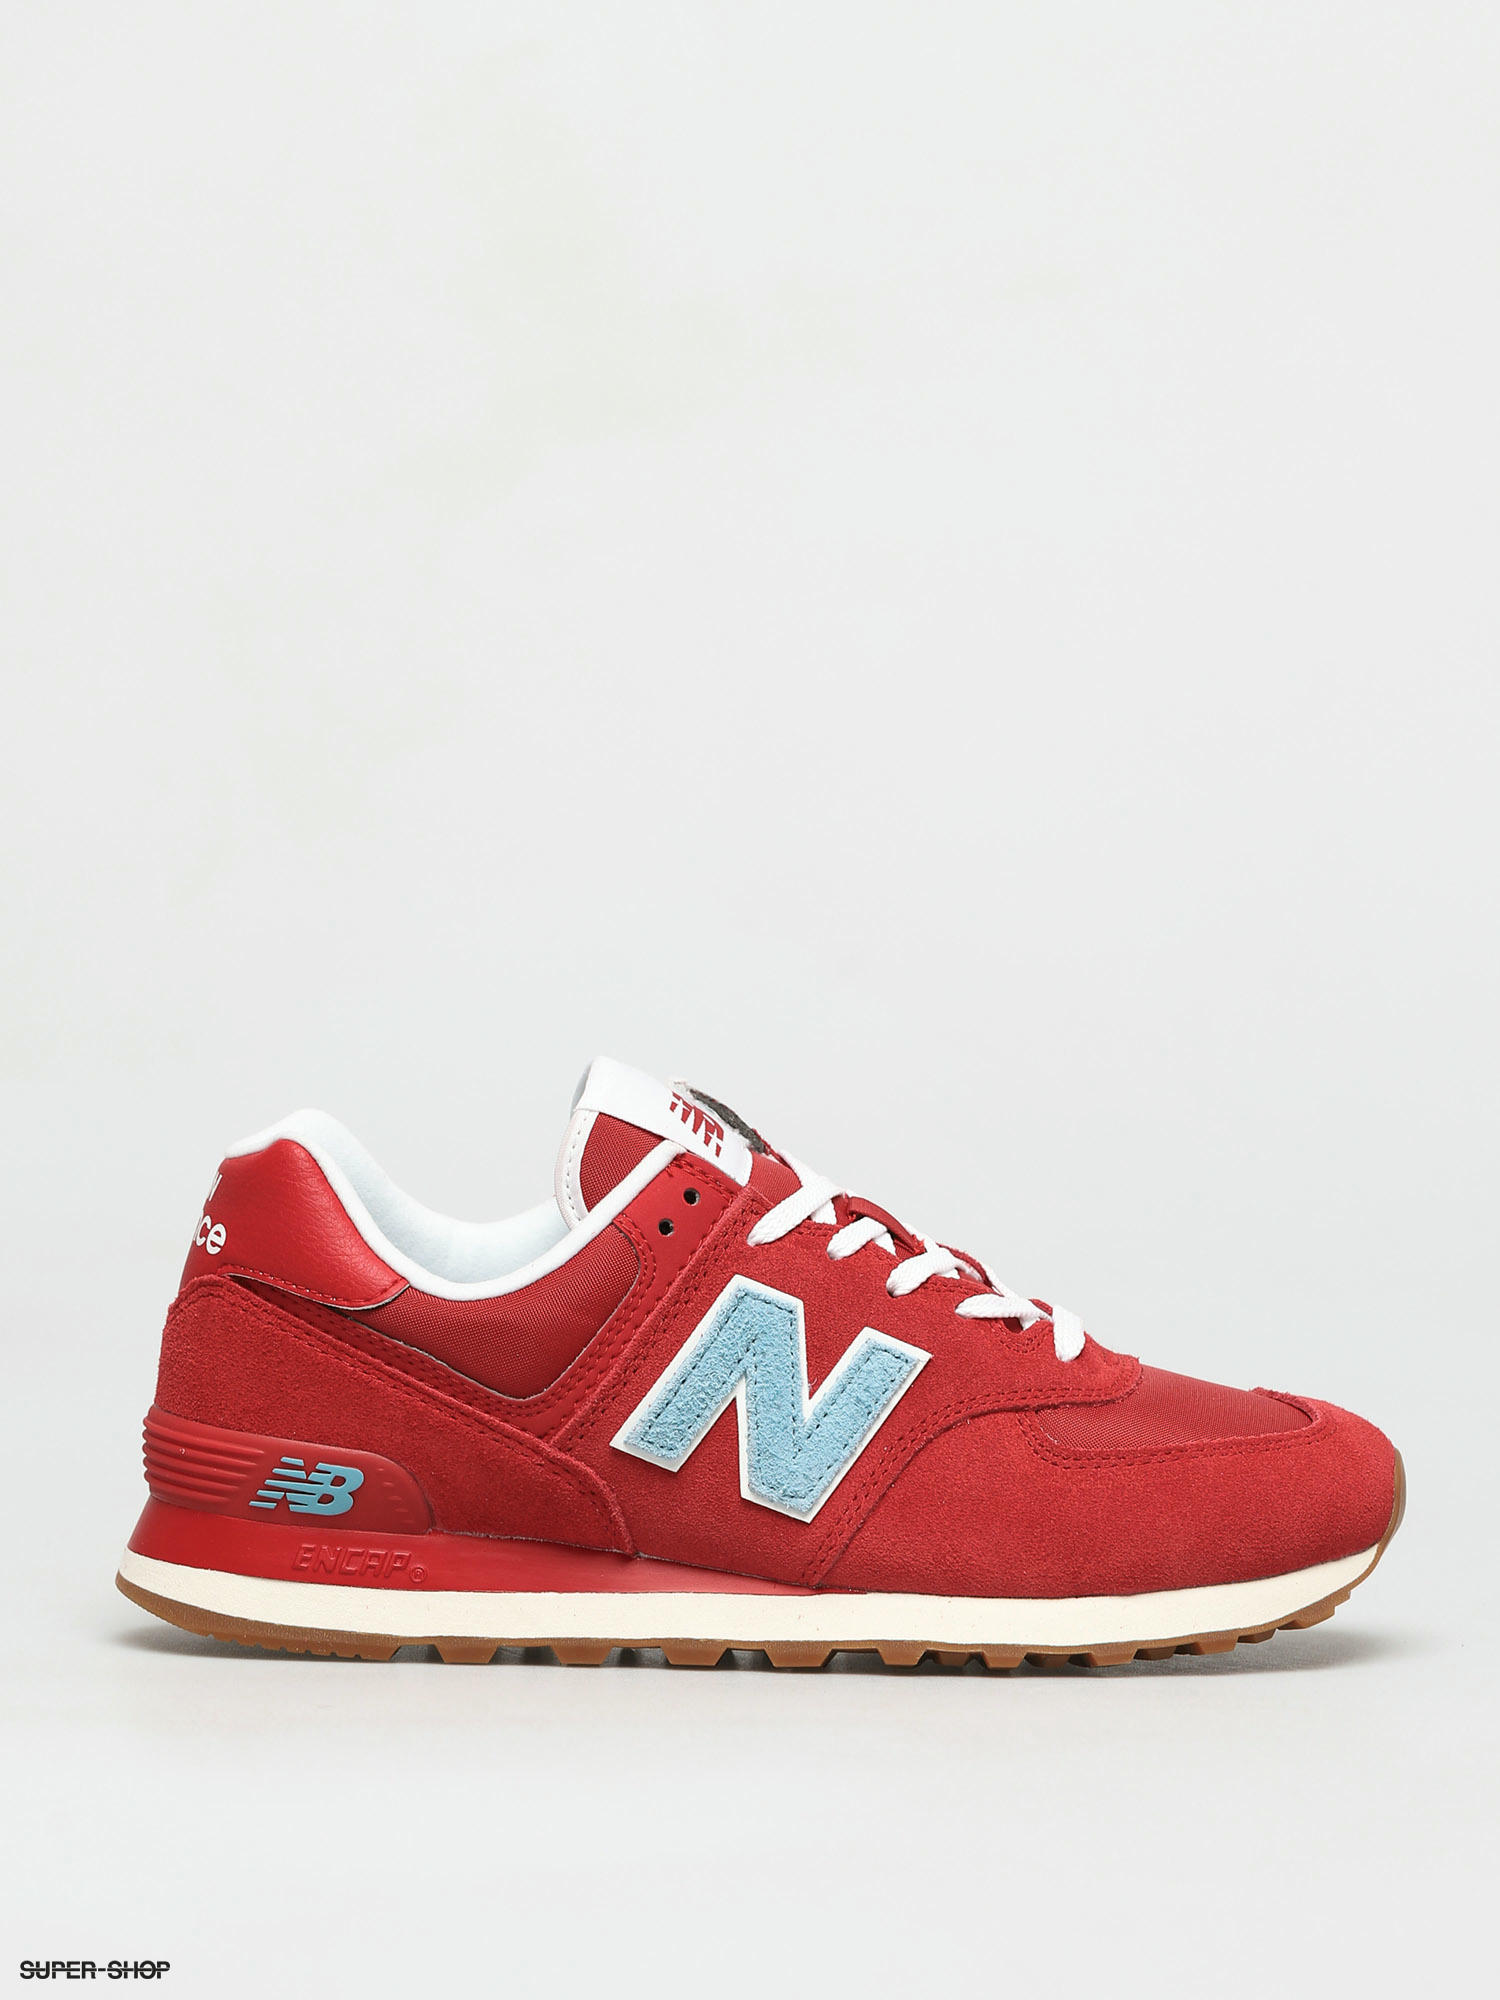 Red White And Blue New Balance Cleats - New Balance 574 Core Plus Men's ...